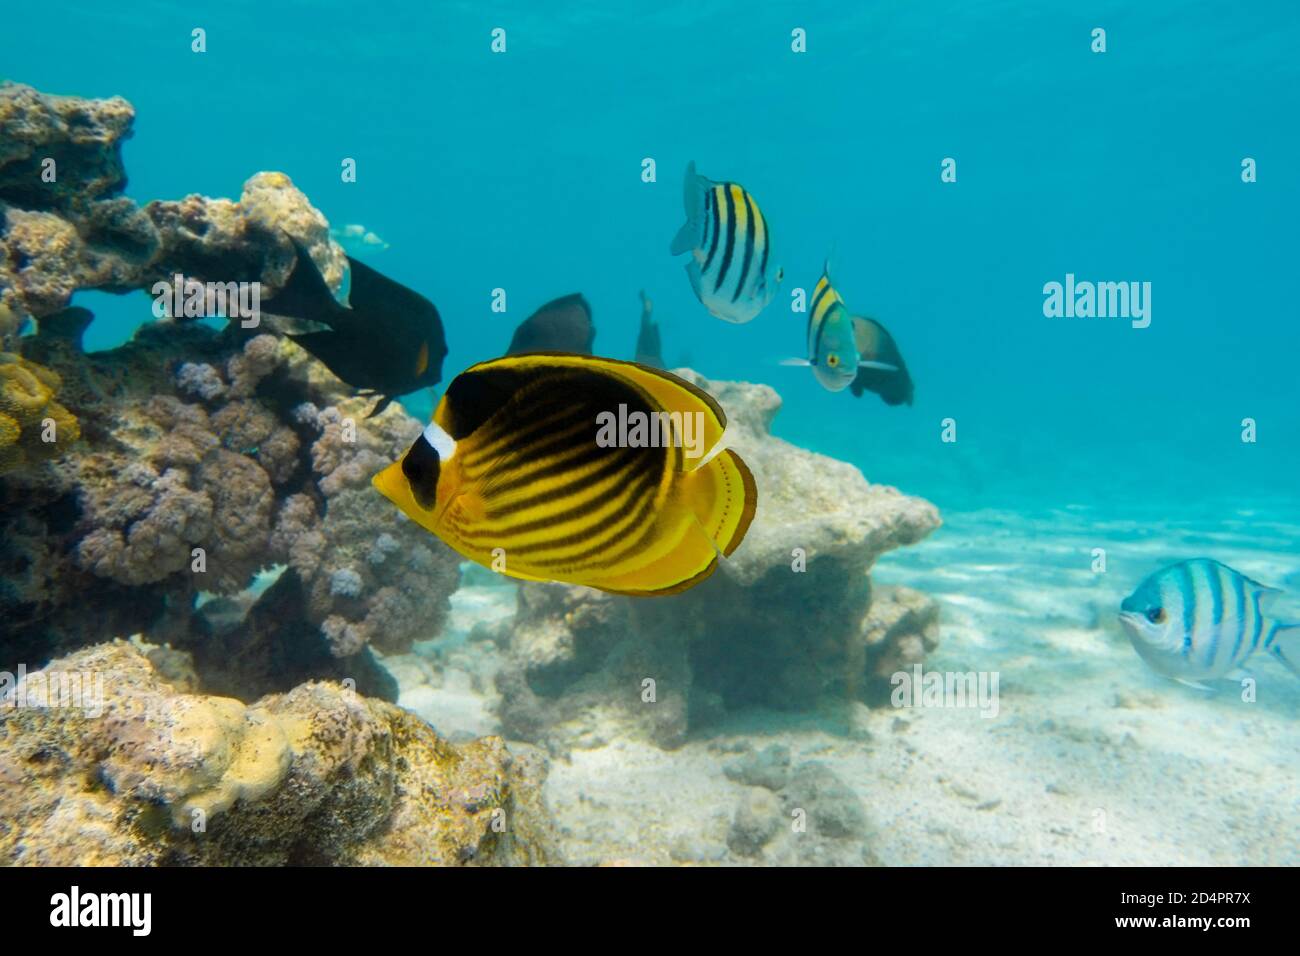 Raccoon Butterflyfish (Chaetodon lunula) over the coral reef, clear blue turquoise water. Colorful tropical fish in the ocean. Beauty stripped saltwat Stock Photo